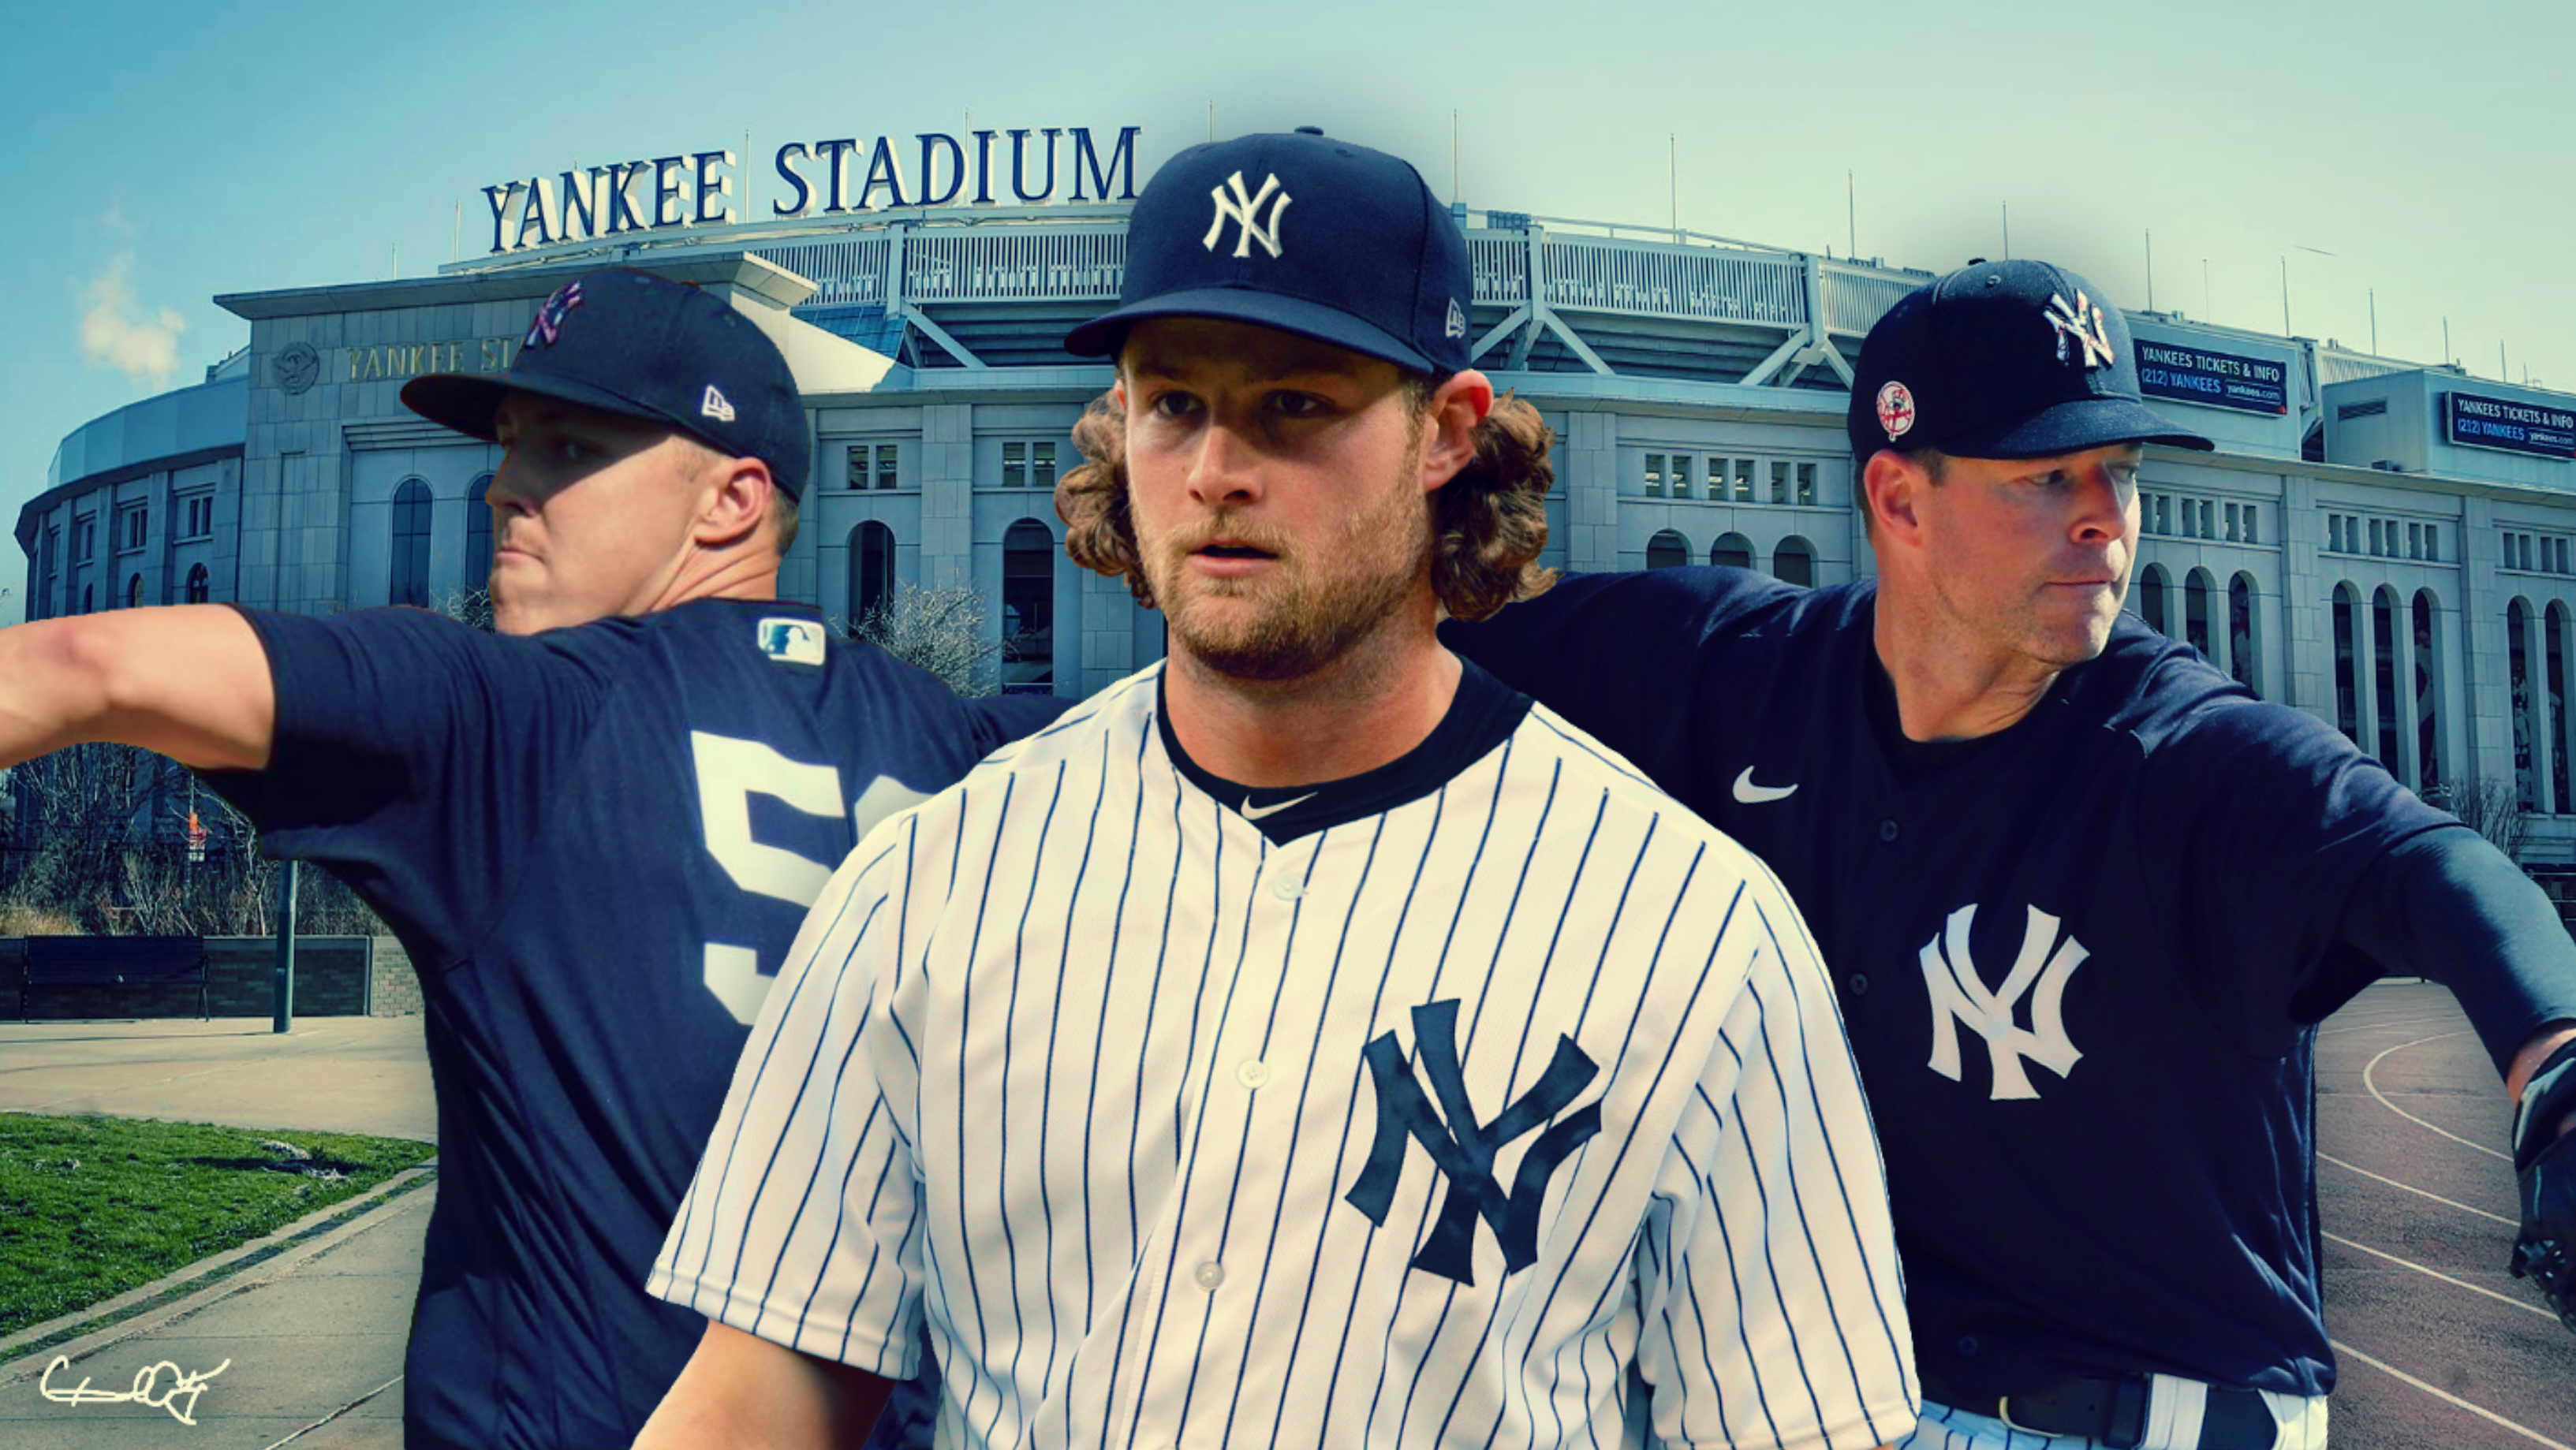 New York Yankees Analysis: “The Big Three,” Cole, Kluber, and Taillon